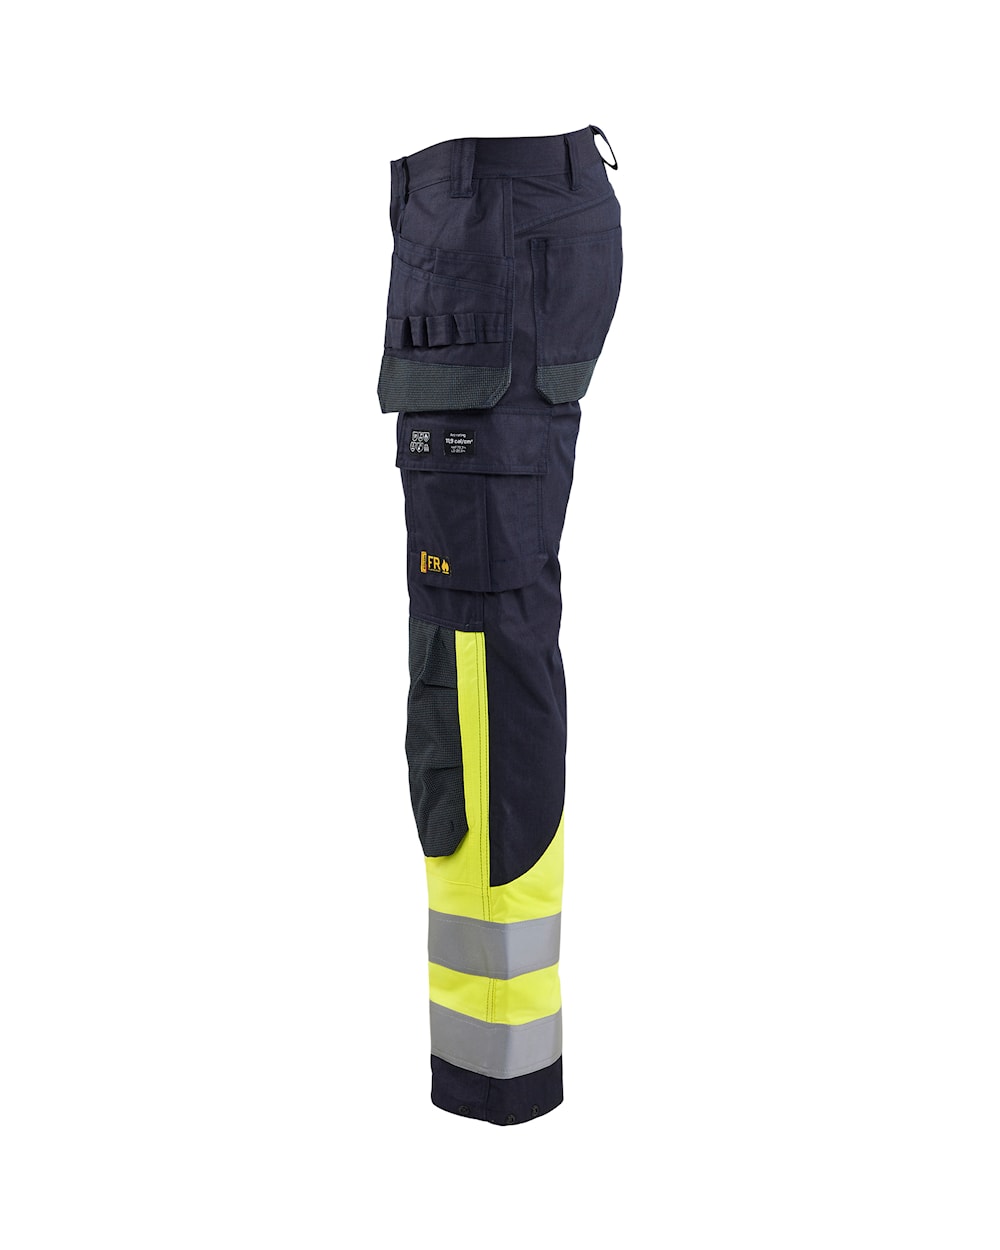 Blaklader Multinorm Inherent Trousers 1489 #colour_navy-blue-hi-vis-yellow